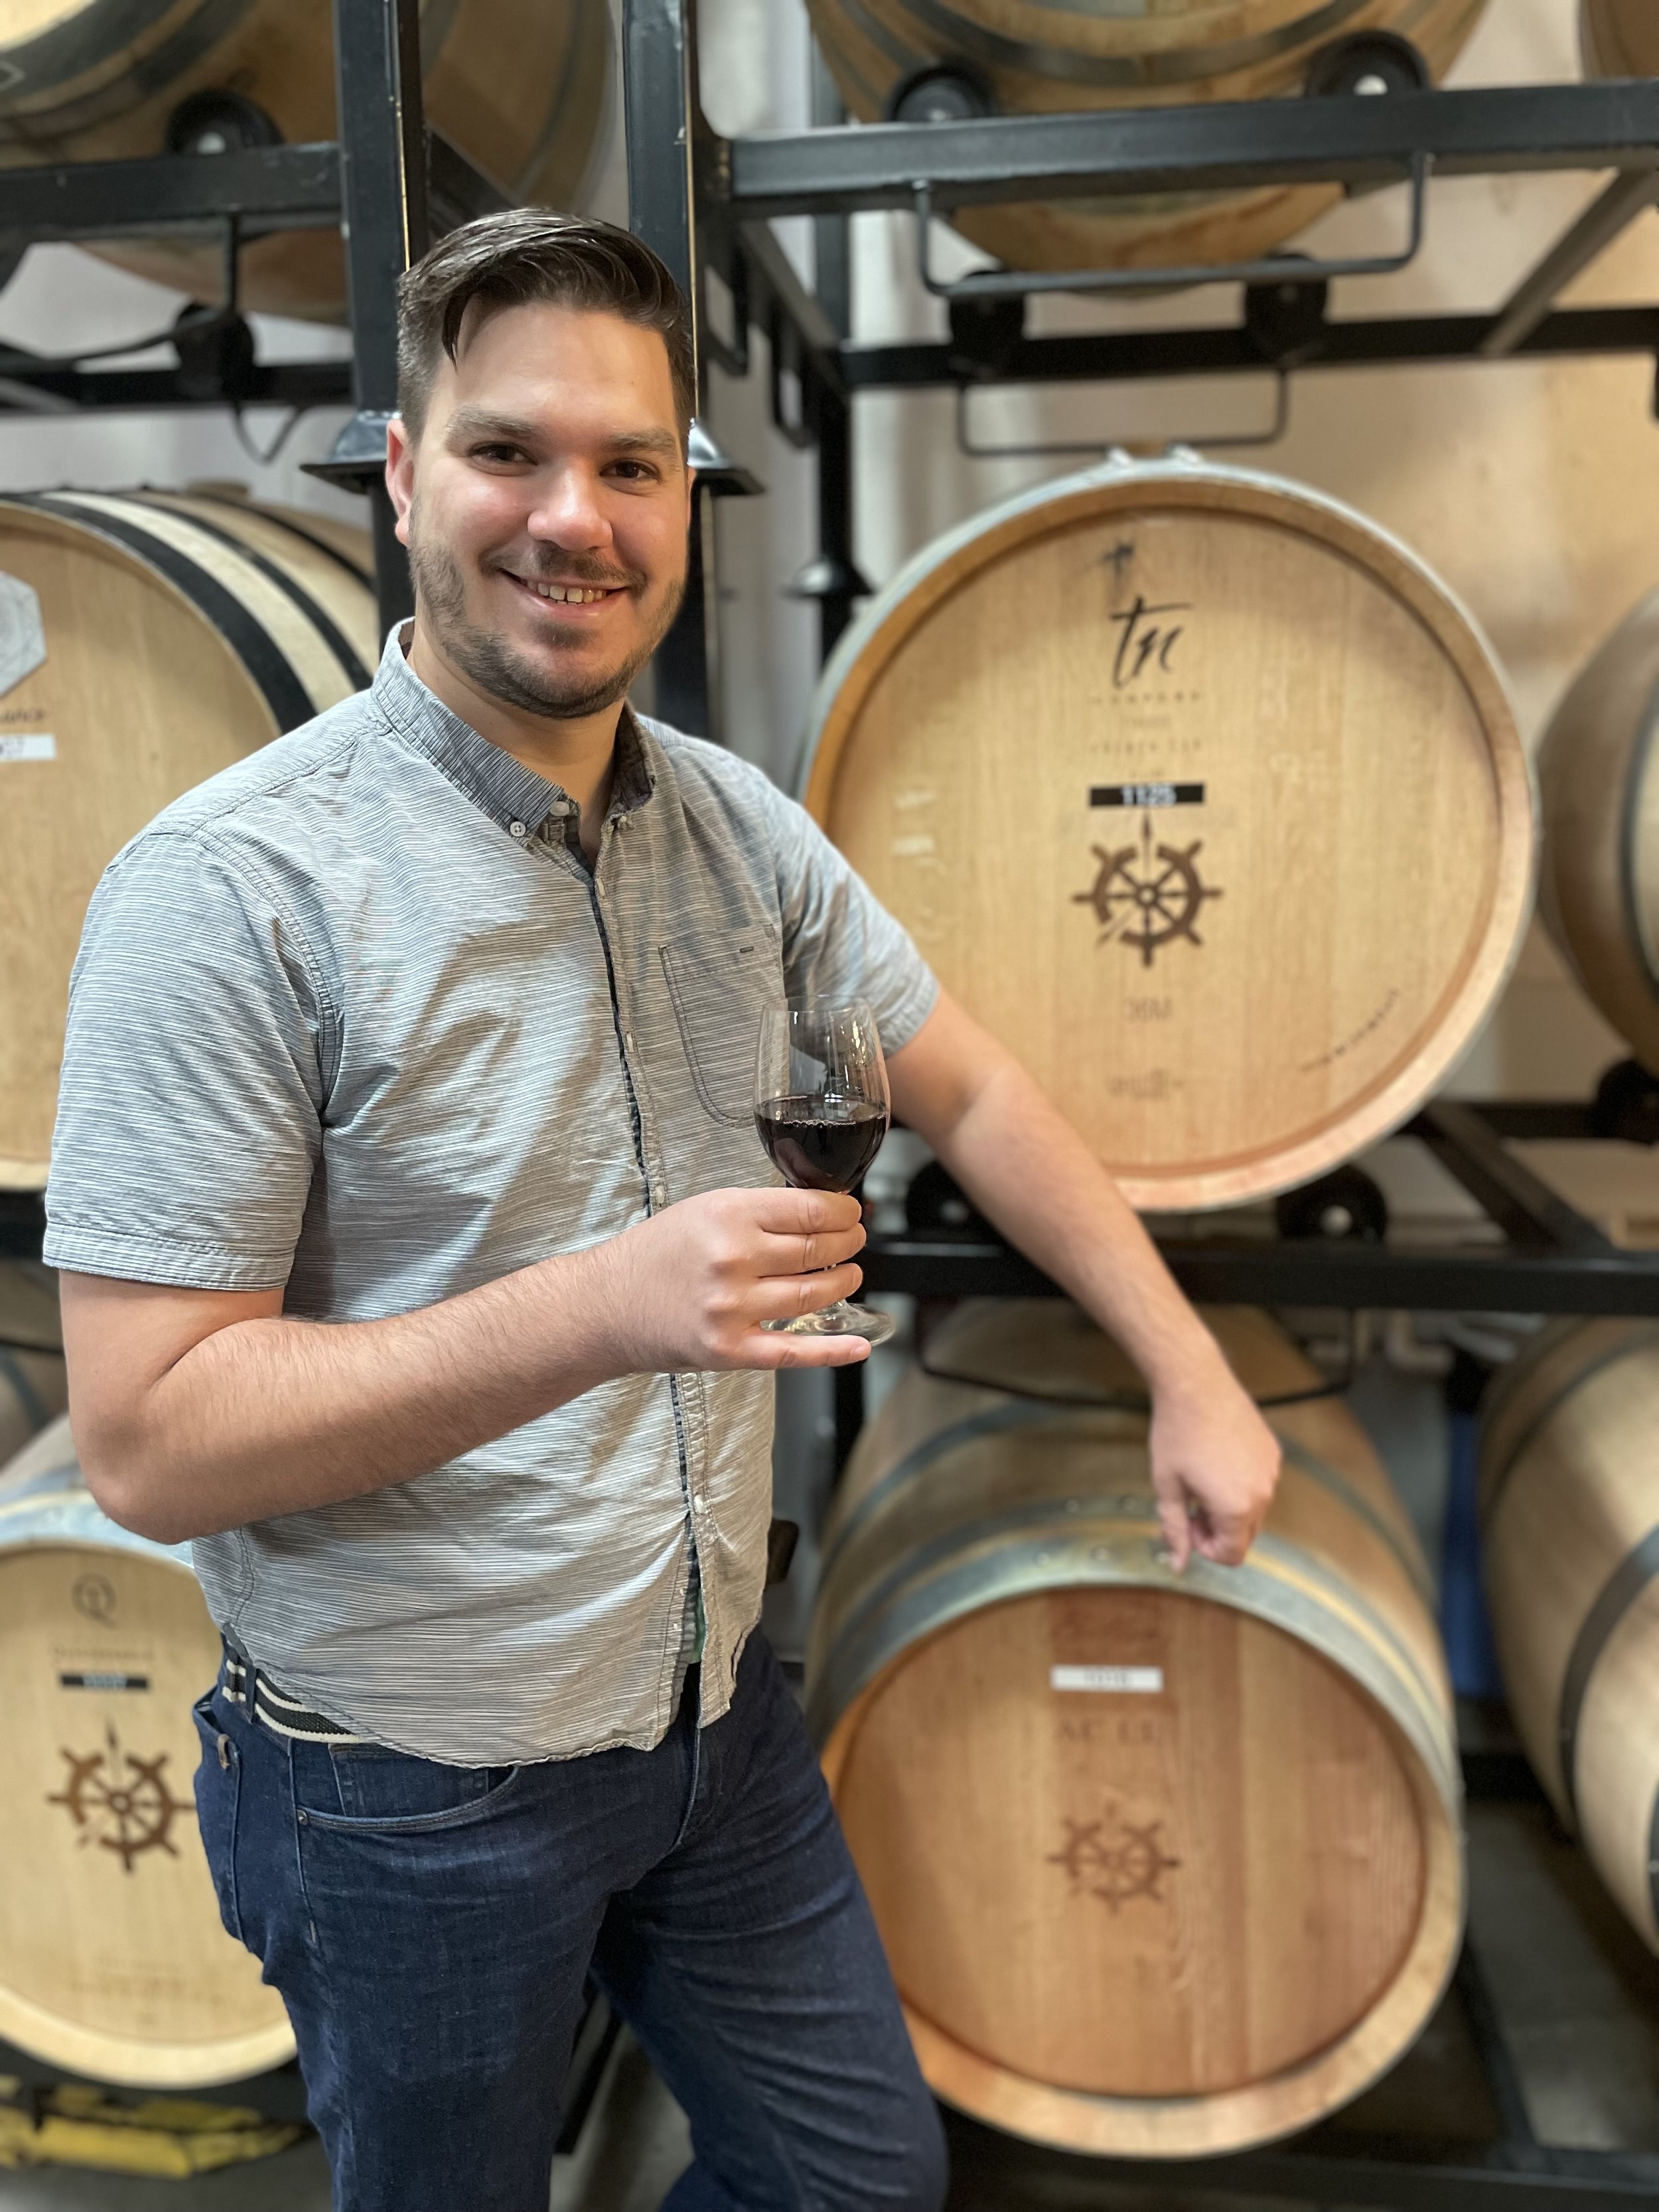 Man standing in front of a wine barrel holding a glass of wine